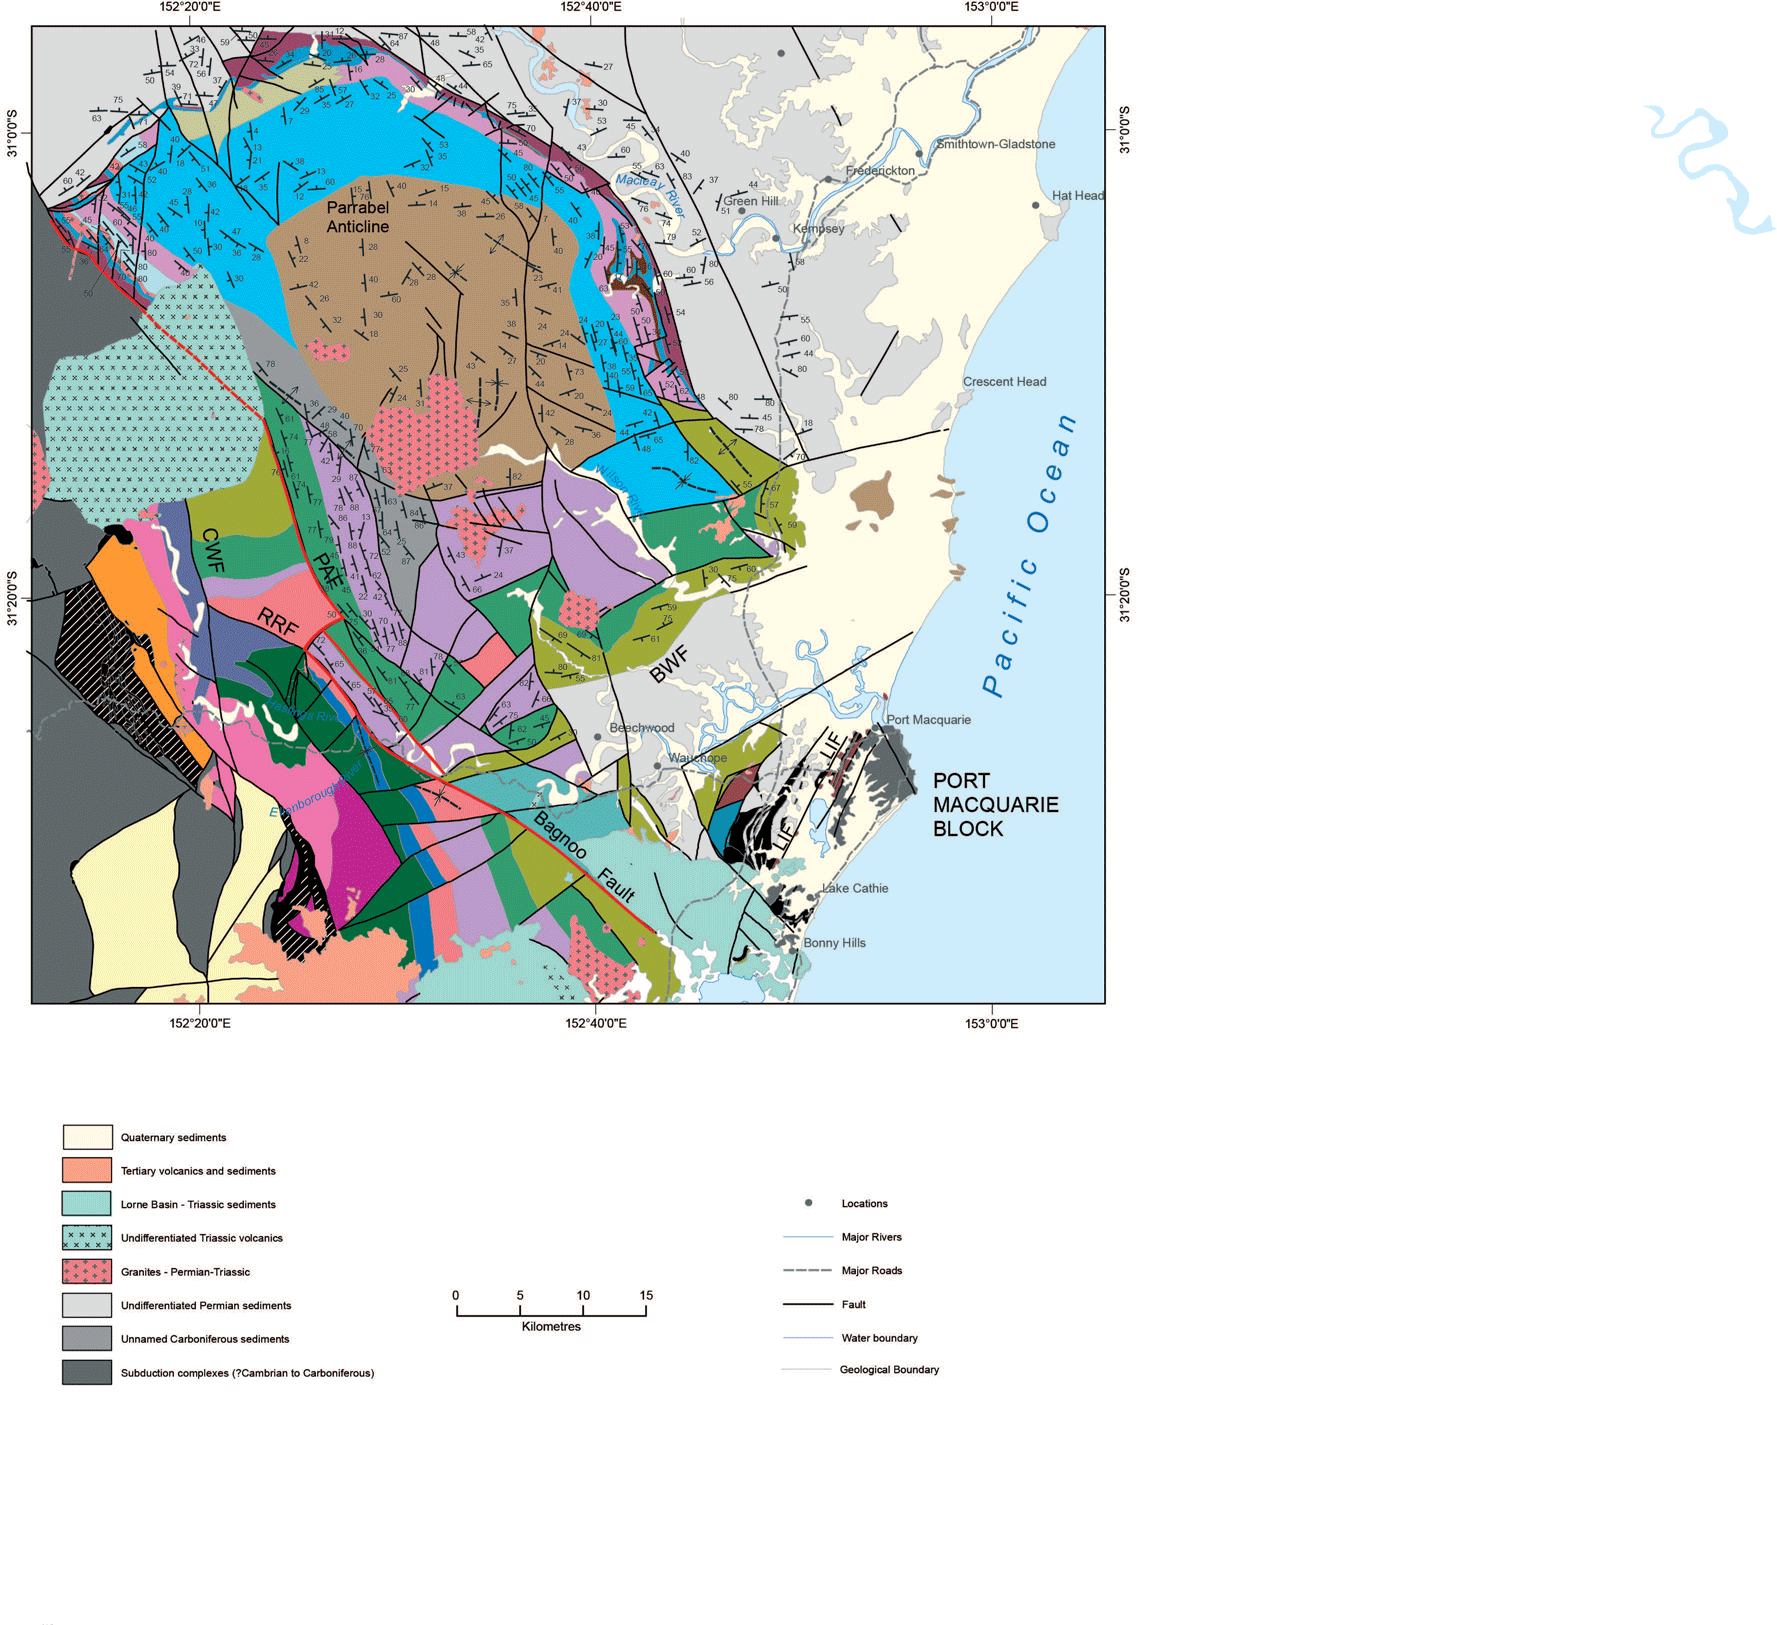 Geological map